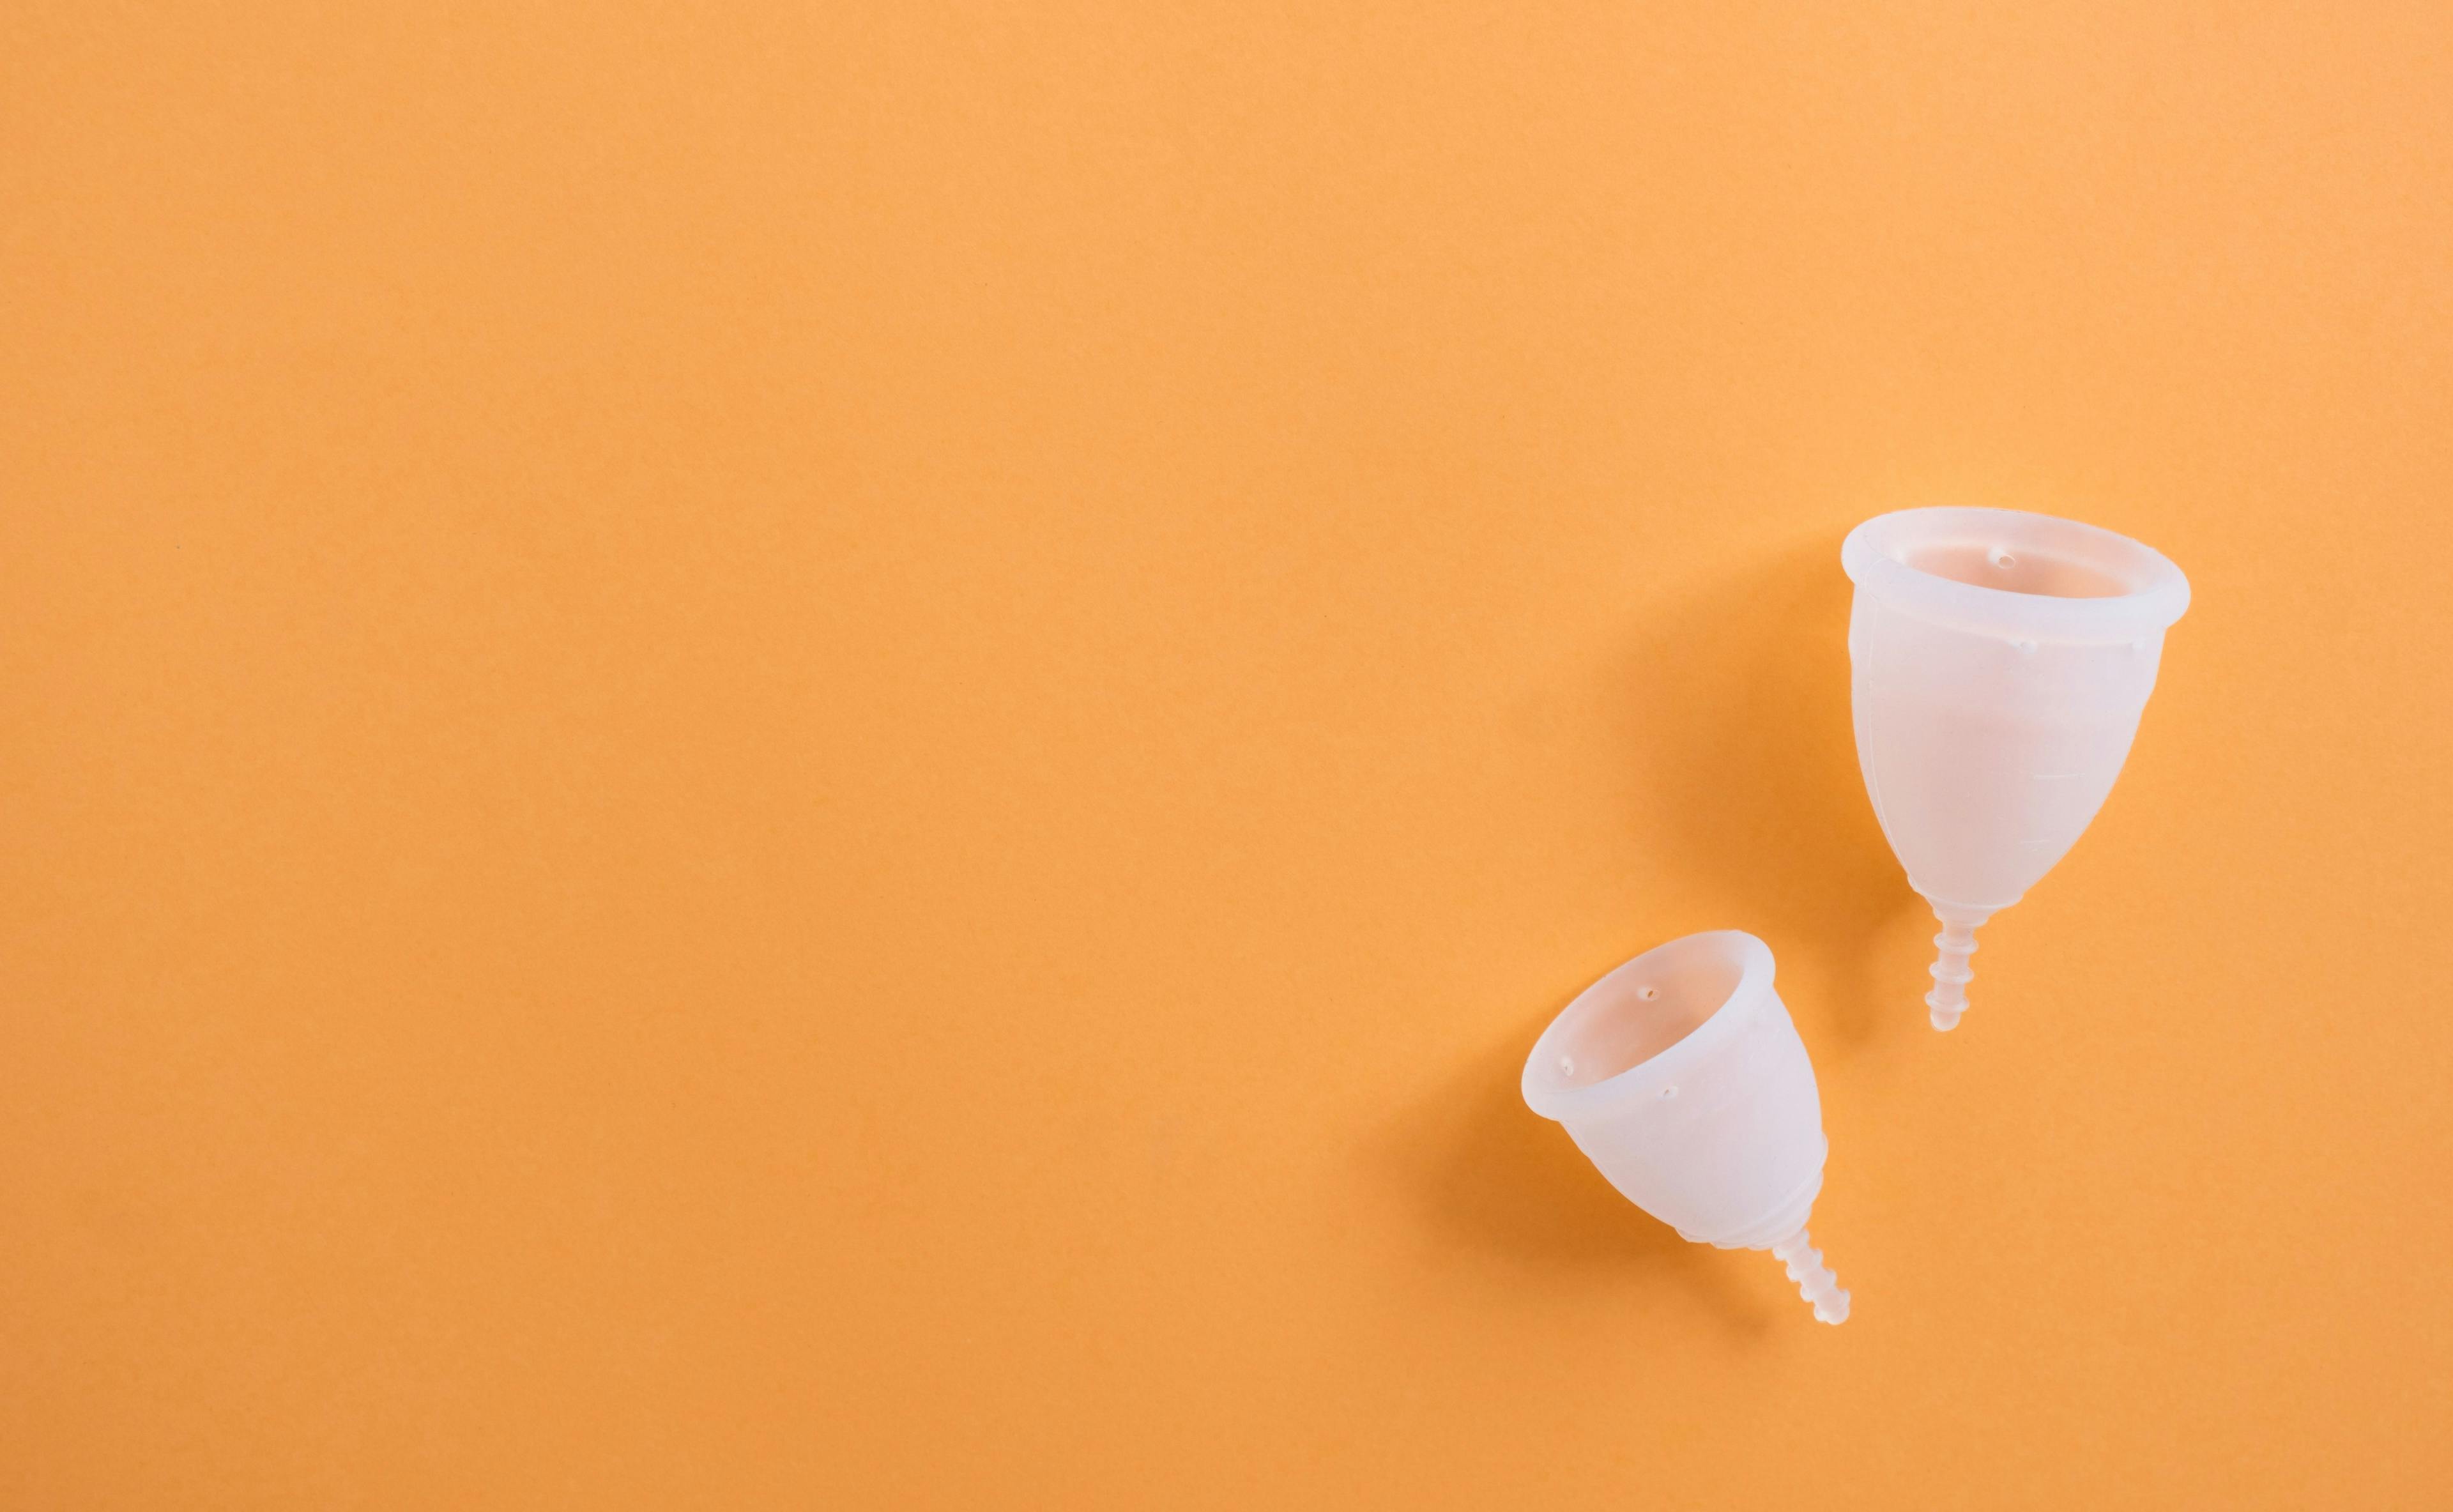 Menstrual cups have positive financial and environmental impact